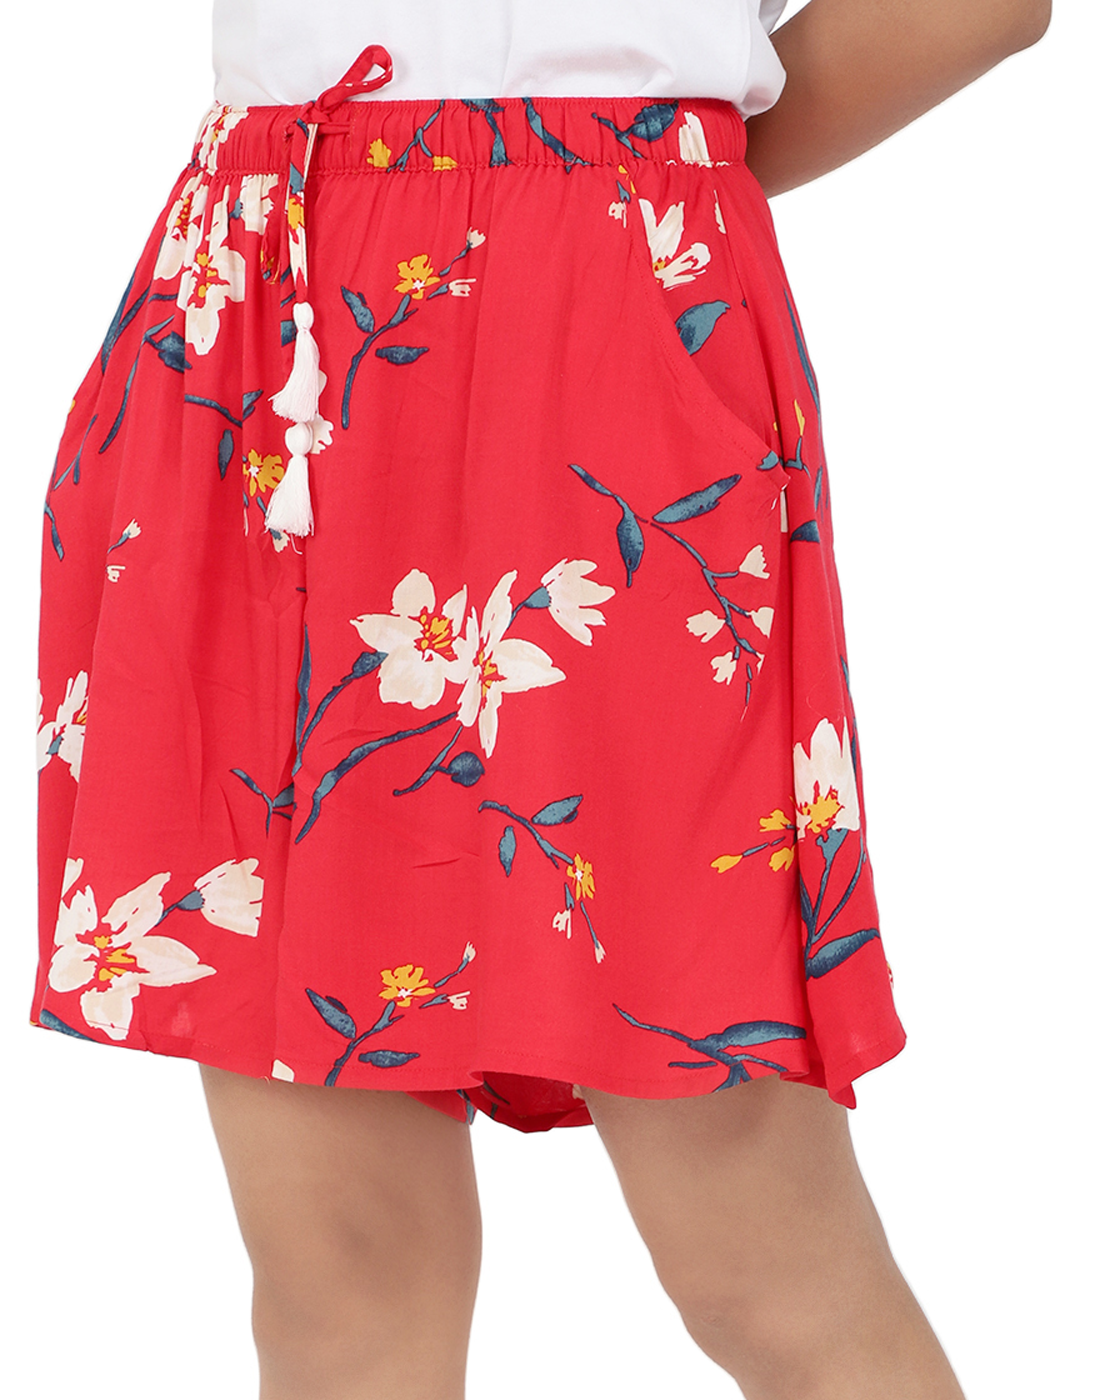 Culottes Shorts for Women-Red Floral